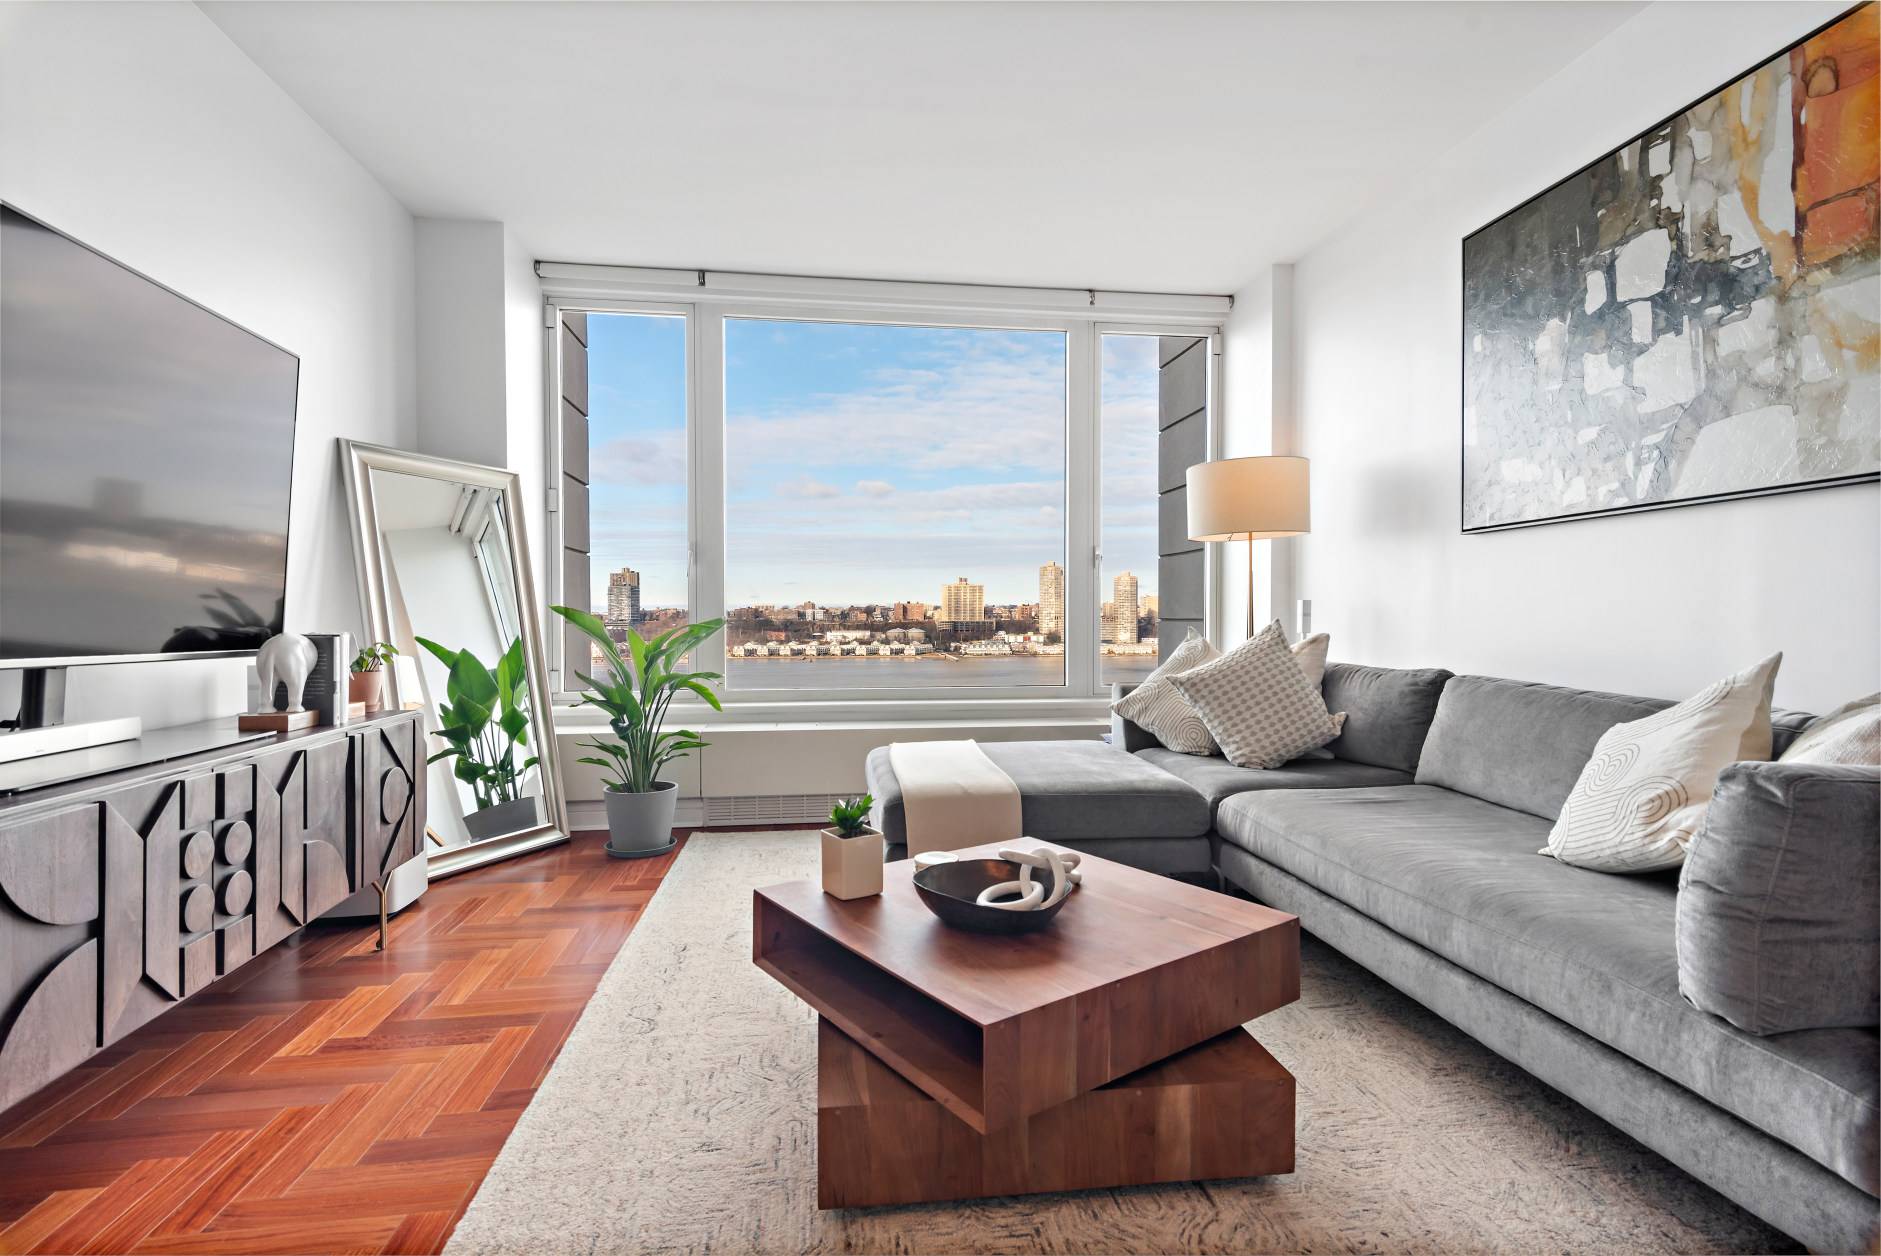 You now have the rare opportunity to live in one of the most sought out largest one bedroom apartments with Scenic Hudson River Views in the luxurious 240 Riverside Blvd.